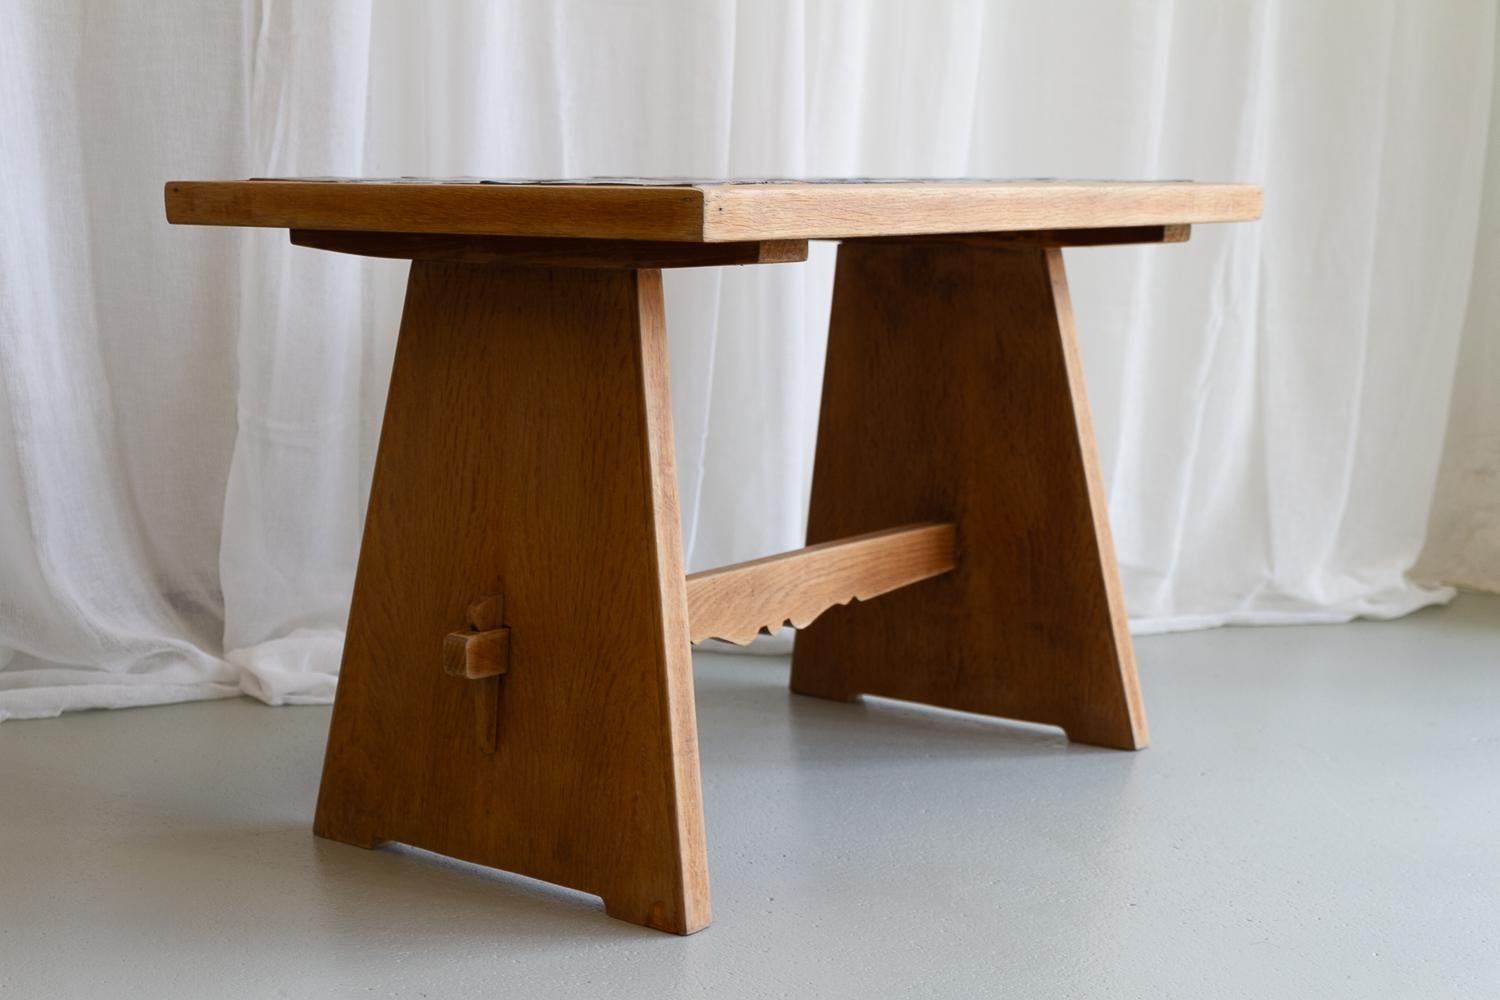 Ceramic Vintage Danish Oak Coffee Table Attributed to Tue Poulsen, 1960s. For Sale